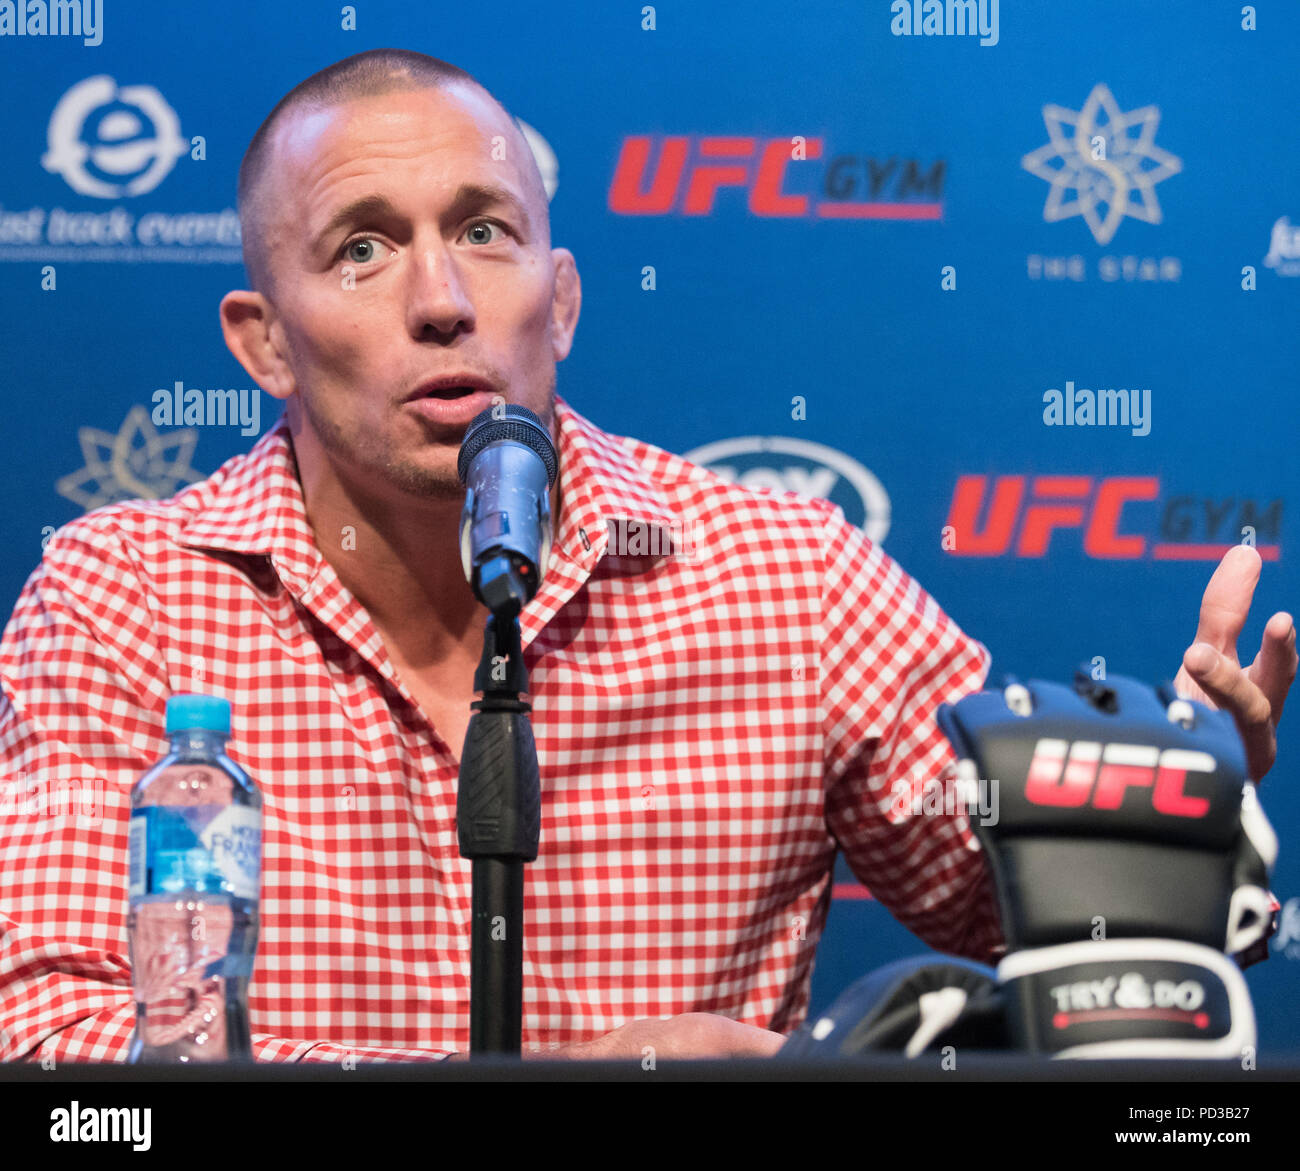 Sydney, Australia. 6th Aug, 2018. Ultimate Fighting Championship(UFC) player George St-Pierre attends a press conference in Sydney, Australia, on Aug. 6, 2018. St-Pierre will give three speeches in Sydney, Melbourne and Brisbane this week to share the lessons he learned in mixed matrial arts. Credit: Zhu Hongye/Xinhua/Alamy Live News Stock Photo